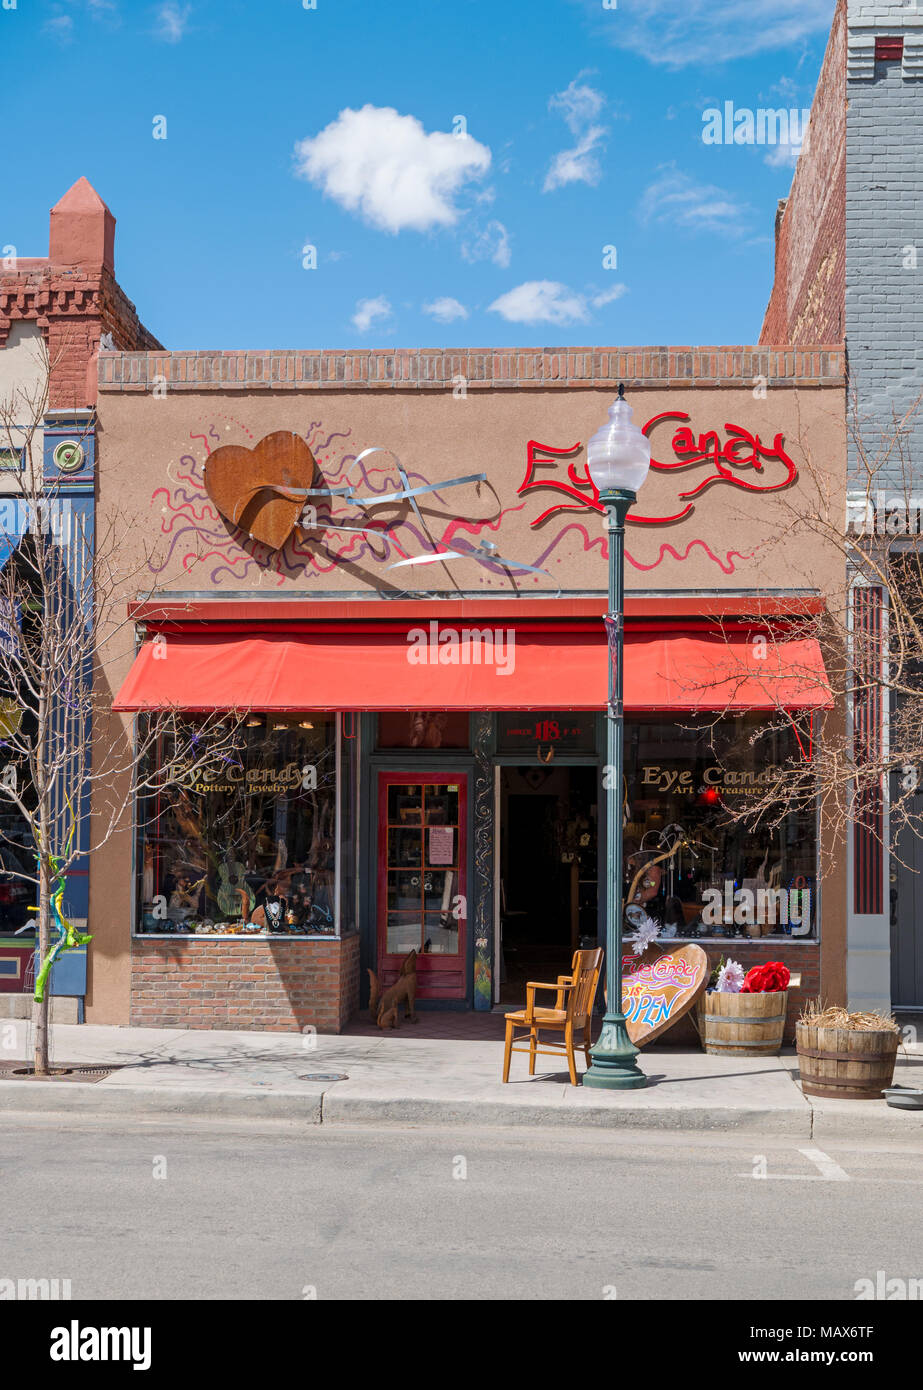 Eye Candy; National Historic District; shops in downtown Salida; Colorado; USA Stock Photo